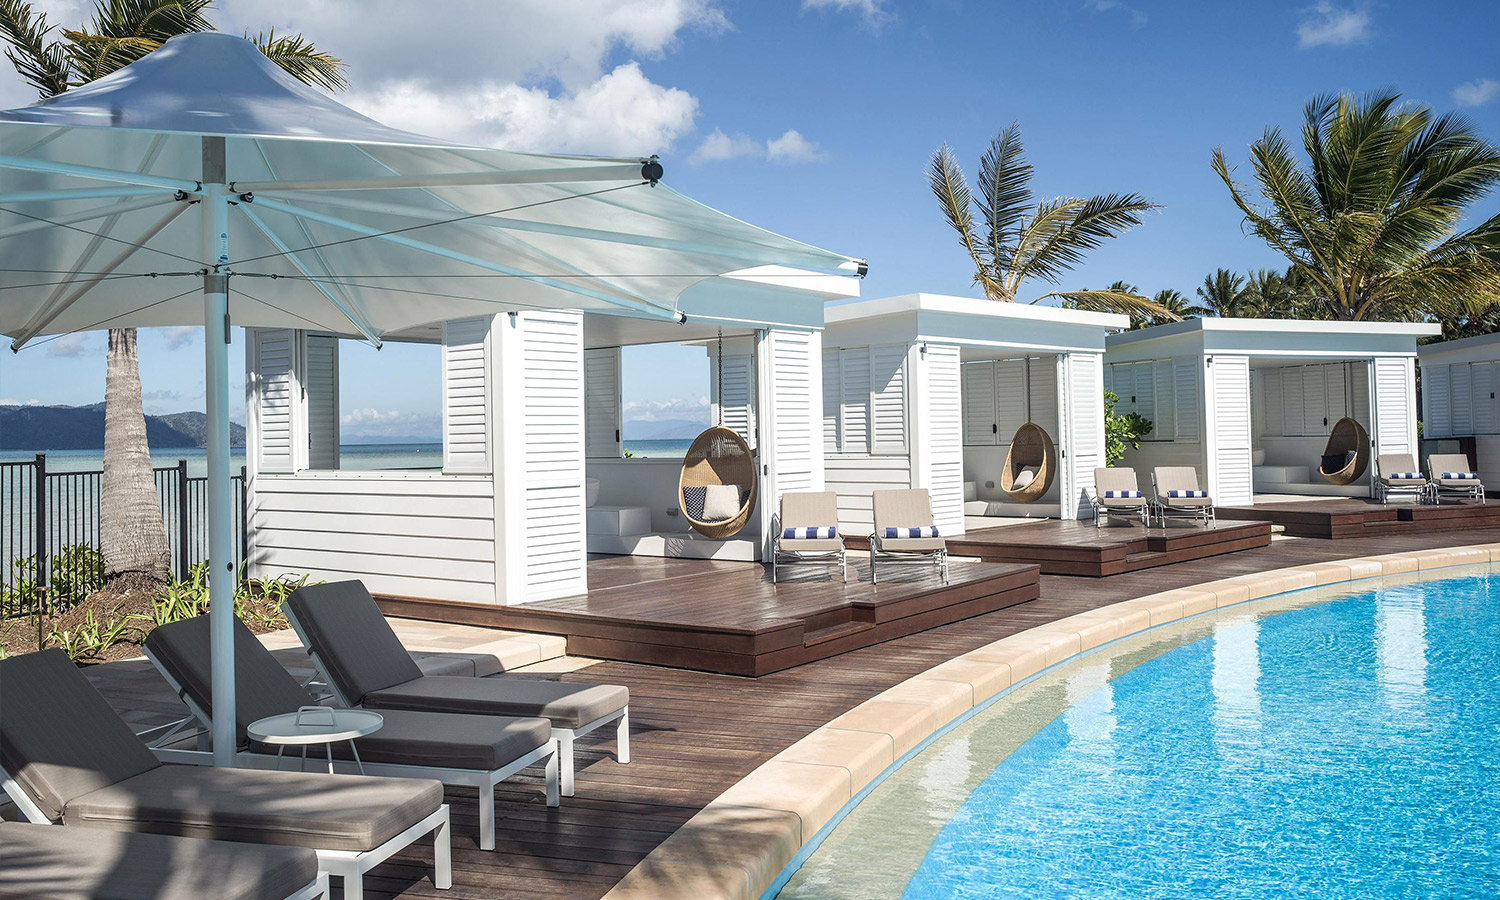 An image showing the poolside cabins at Hayman Island.